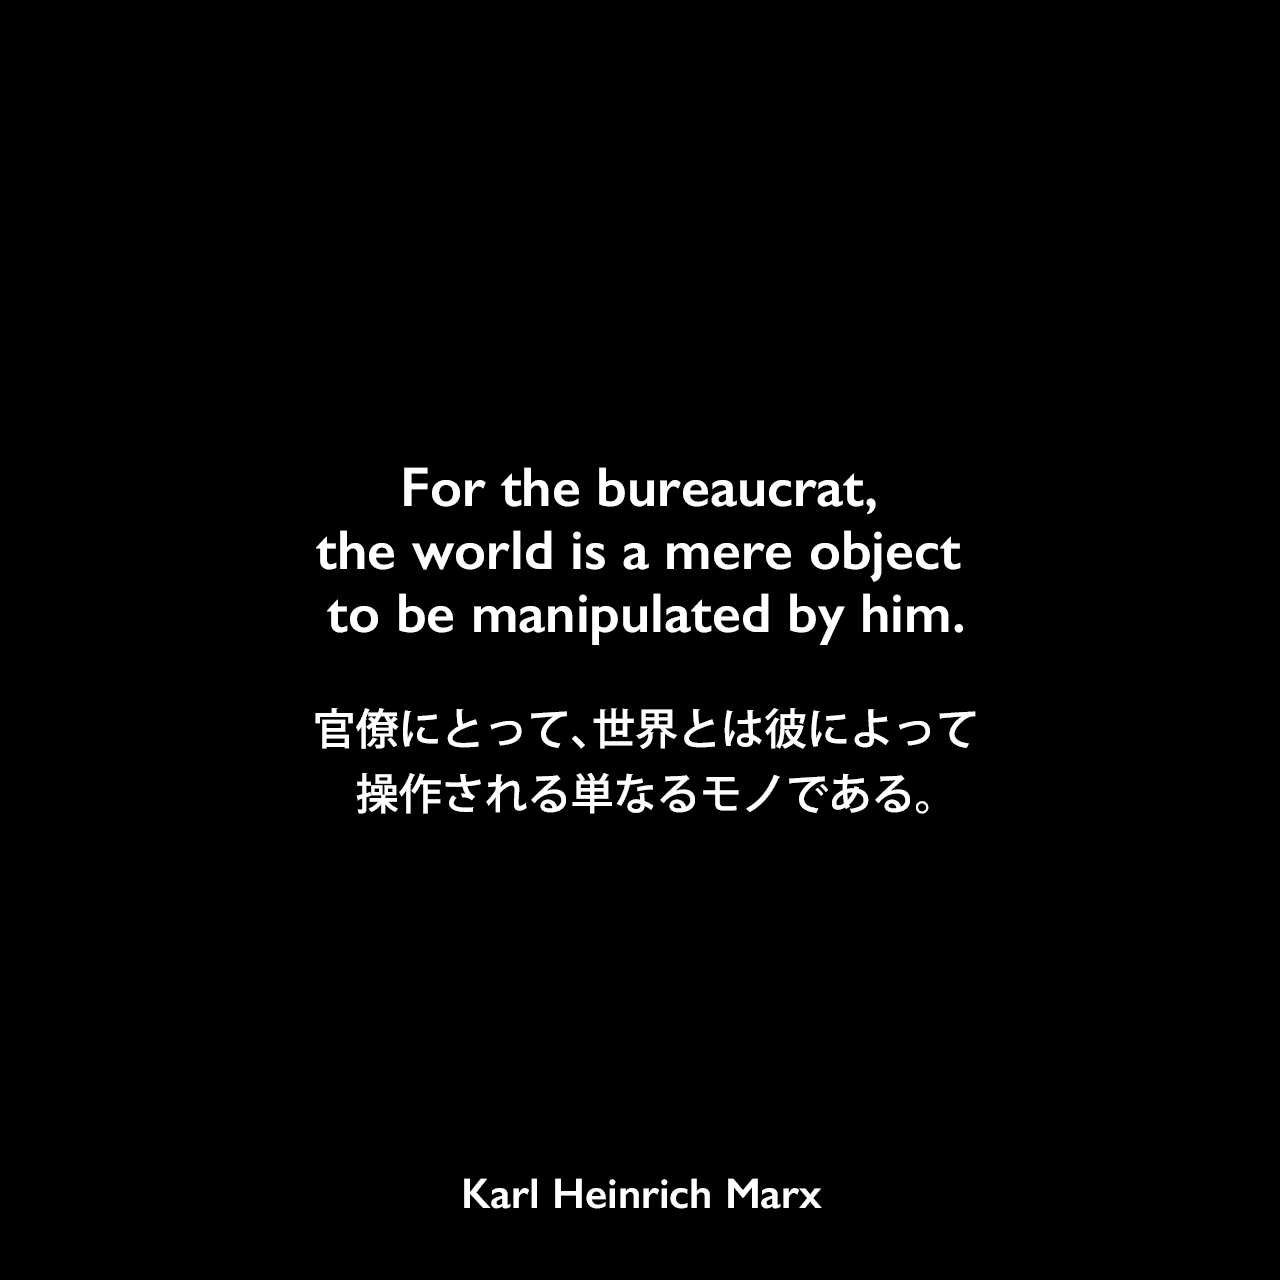 For the bureaucrat, the world is a mere object to be manipulated by him.官僚にとって、世界とは彼によって操作される単なるモノである。Karl Heinrich Marx